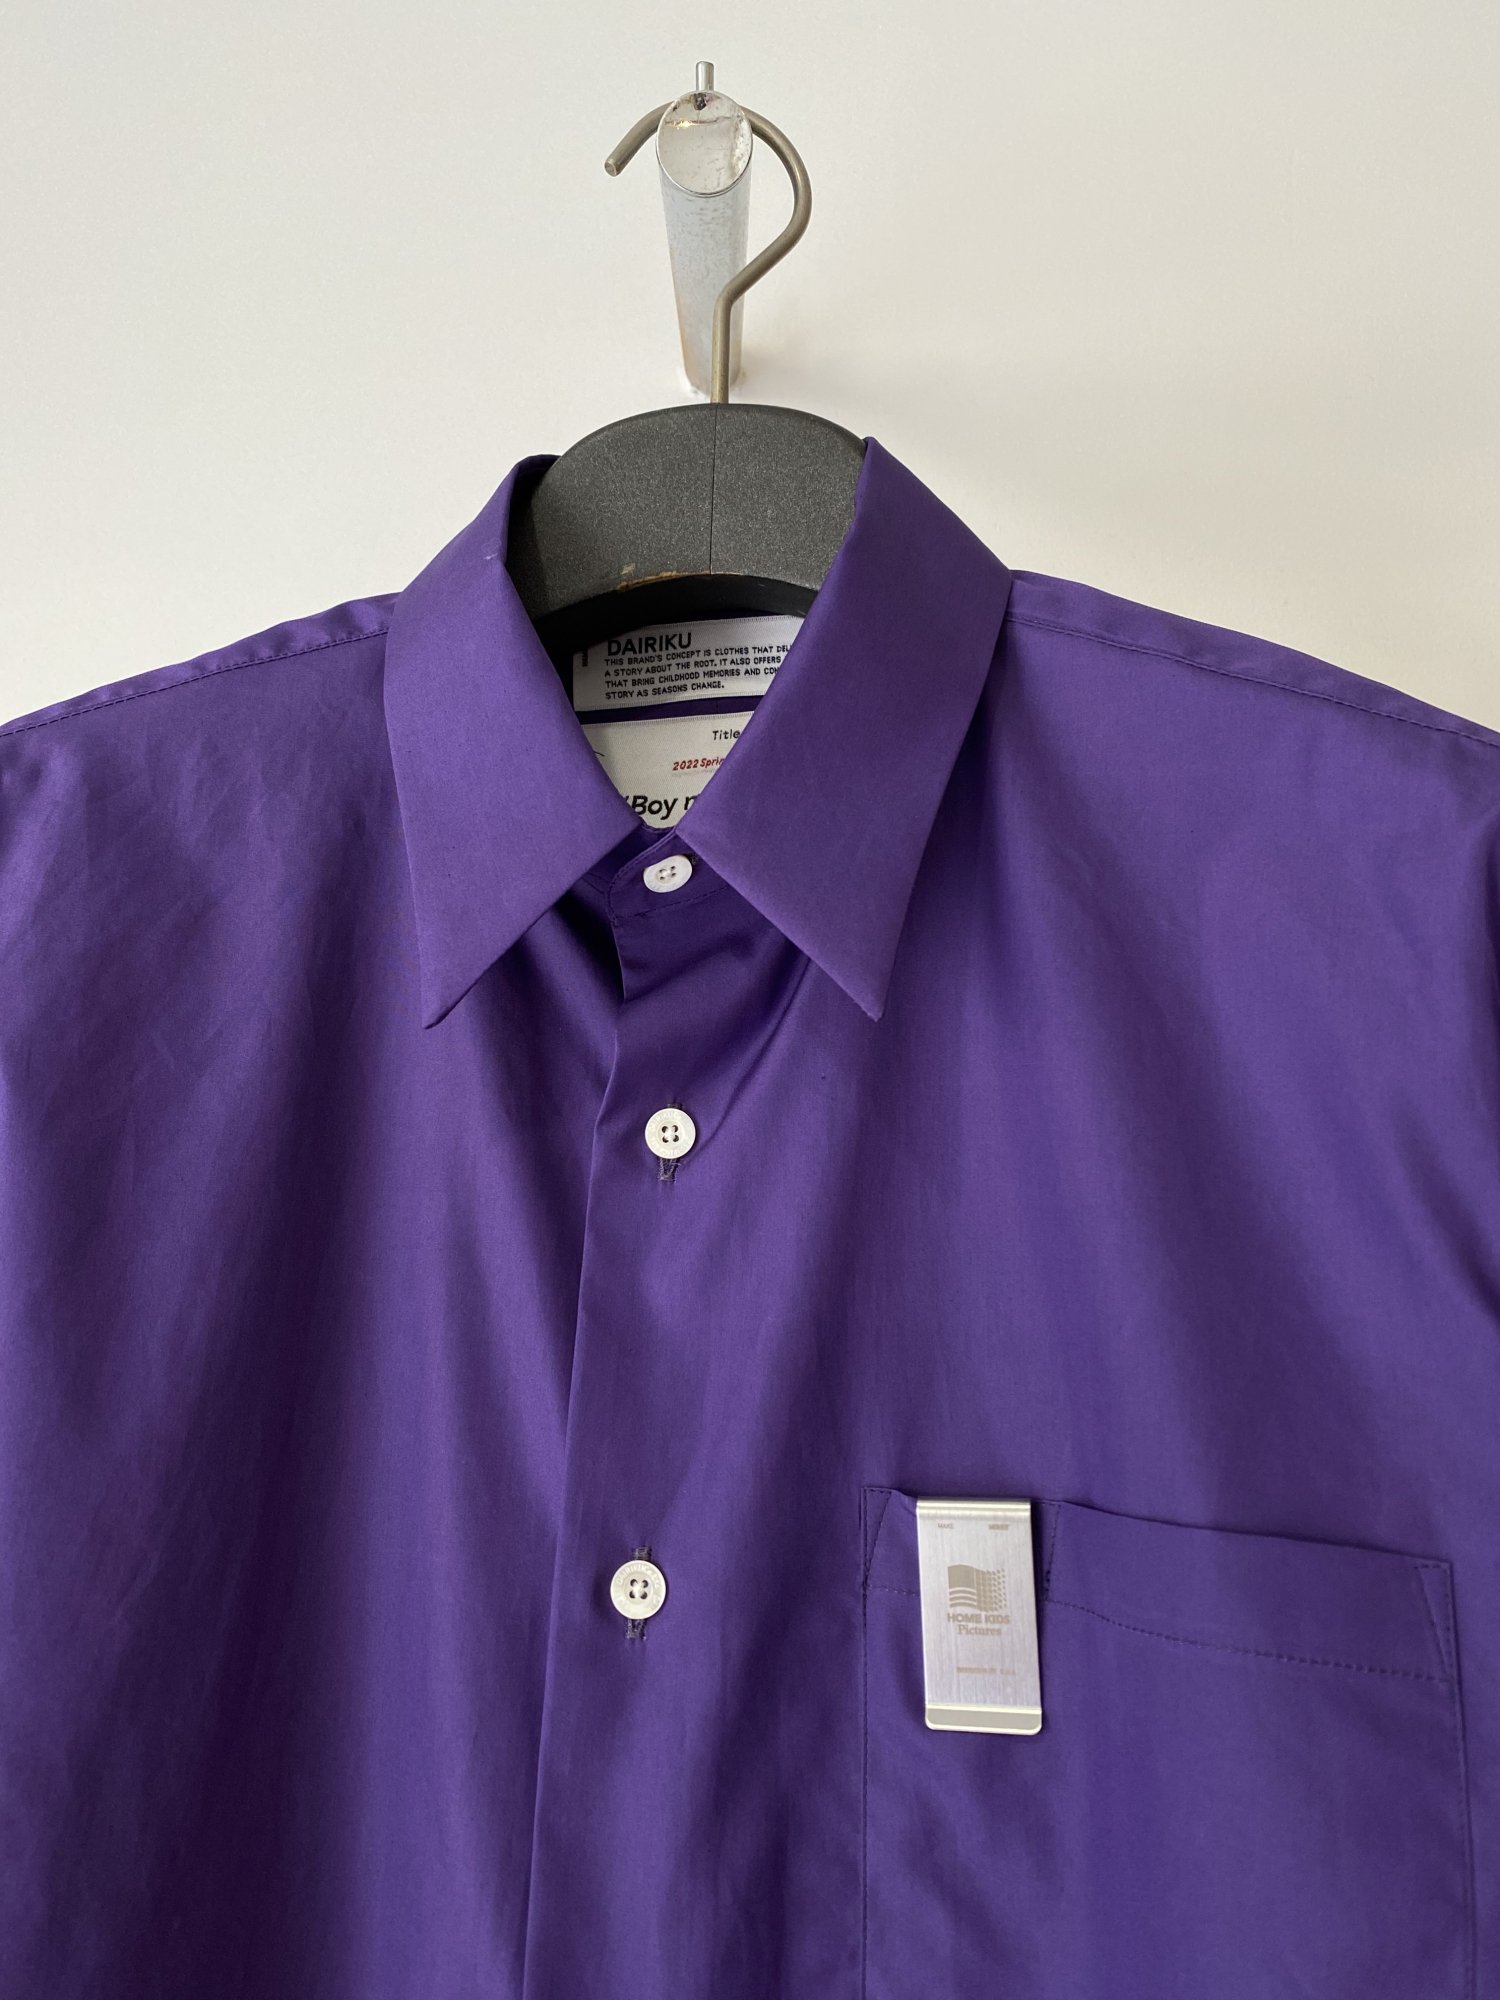 DAIRIKU<br />L-S Dress Shirt with Money Clip / Purple<img class='new_mark_img2' src='https://img.shop-pro.jp/img/new/icons14.gif' style='border:none;display:inline;margin:0px;padding:0px;width:auto;' />